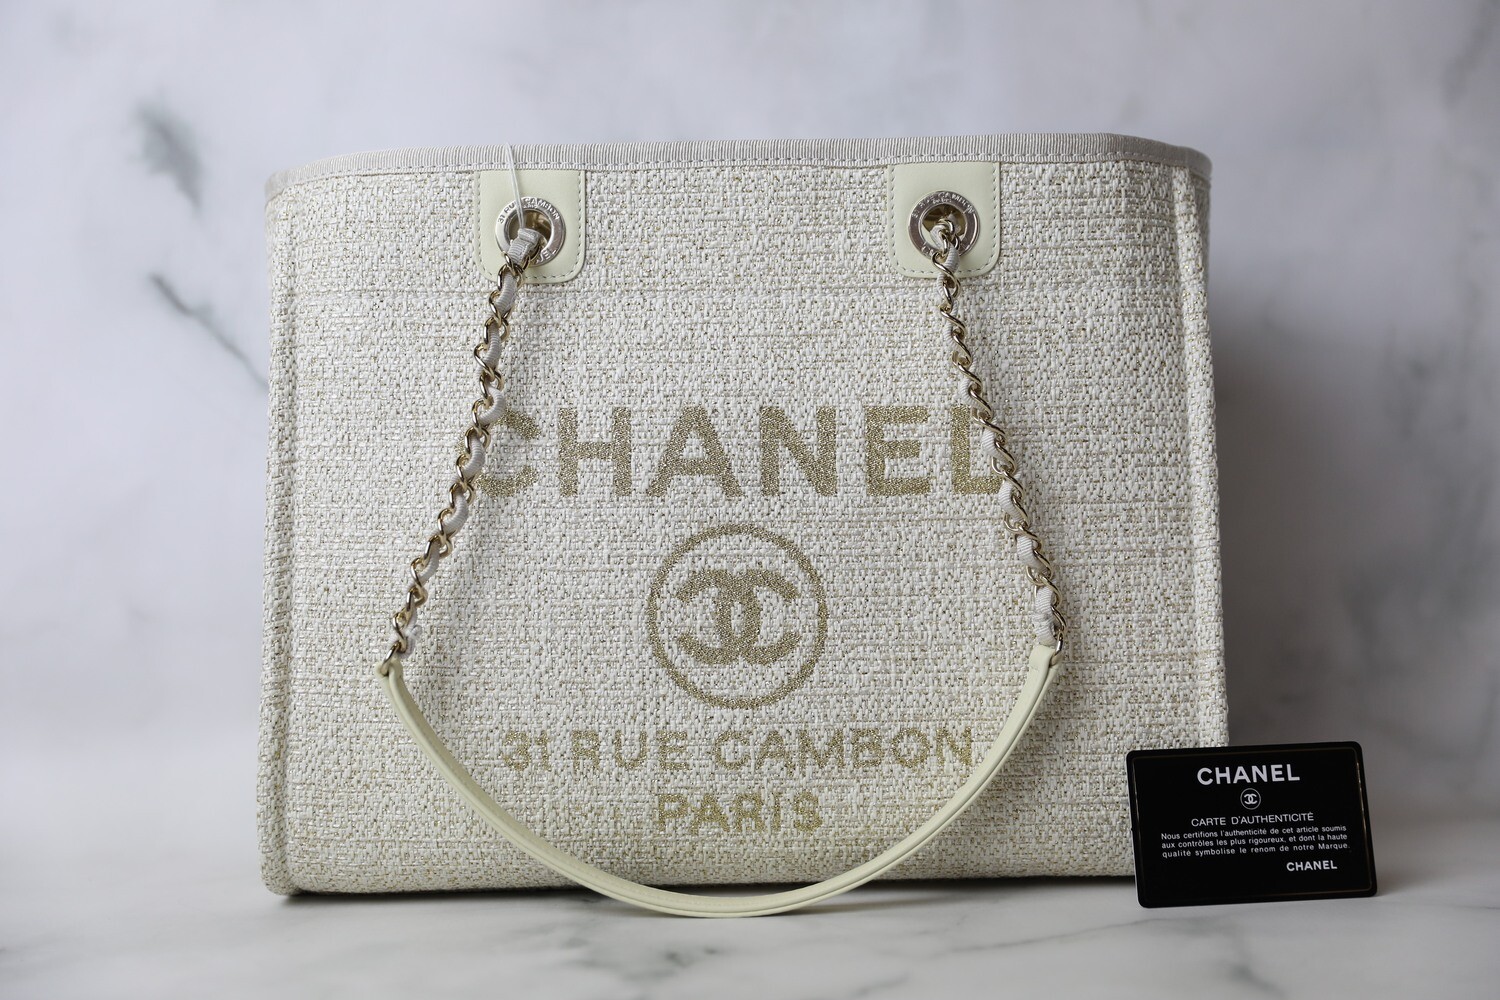 Chanel Deauville Medium, Ivory and Gold with Gold Hardware, New in Dustbag